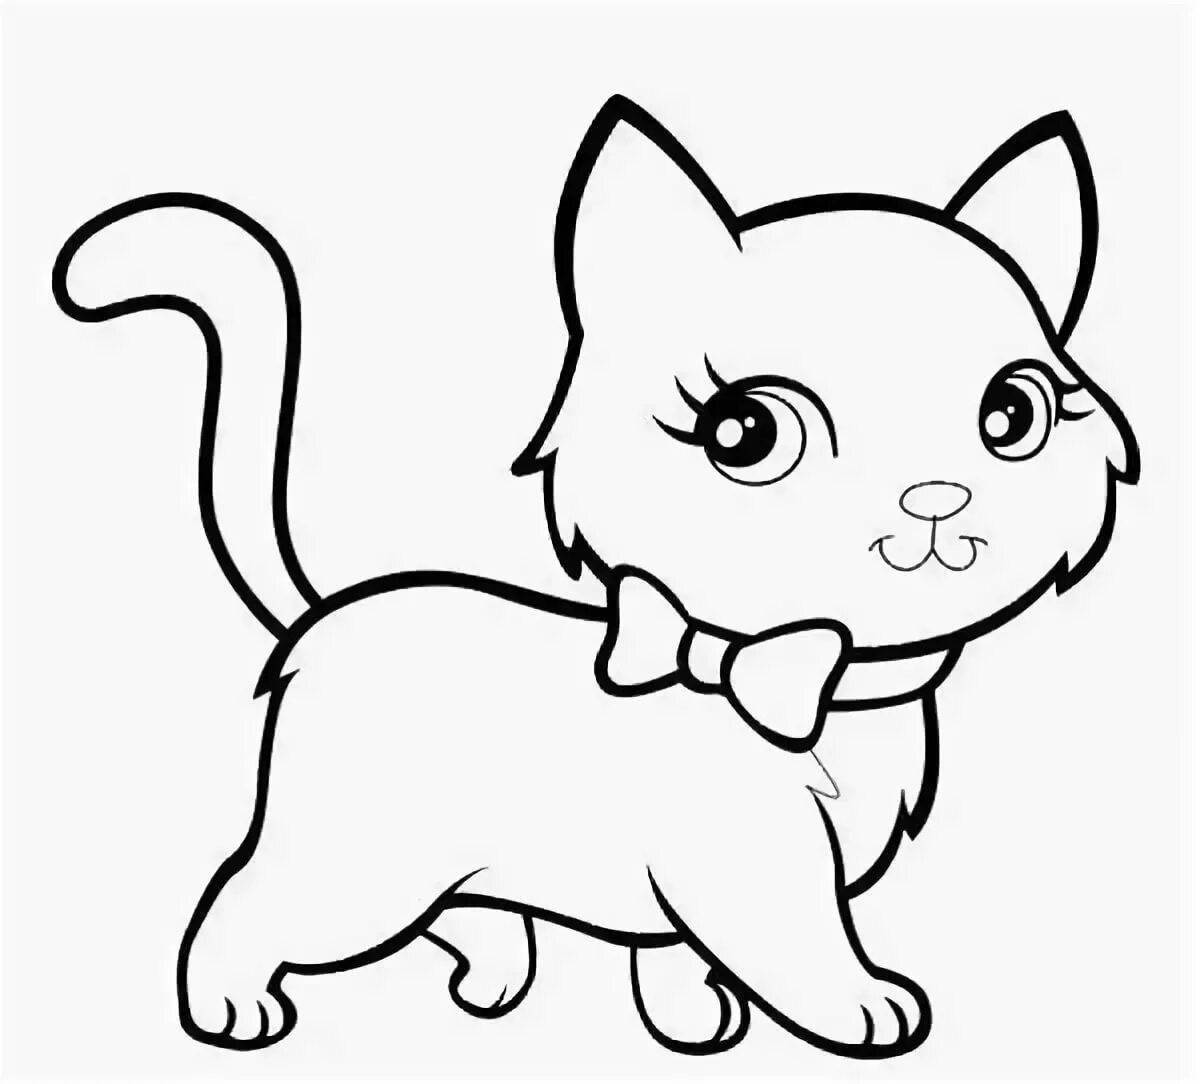 Coloring book fluffy kitten for children 2-3 years old